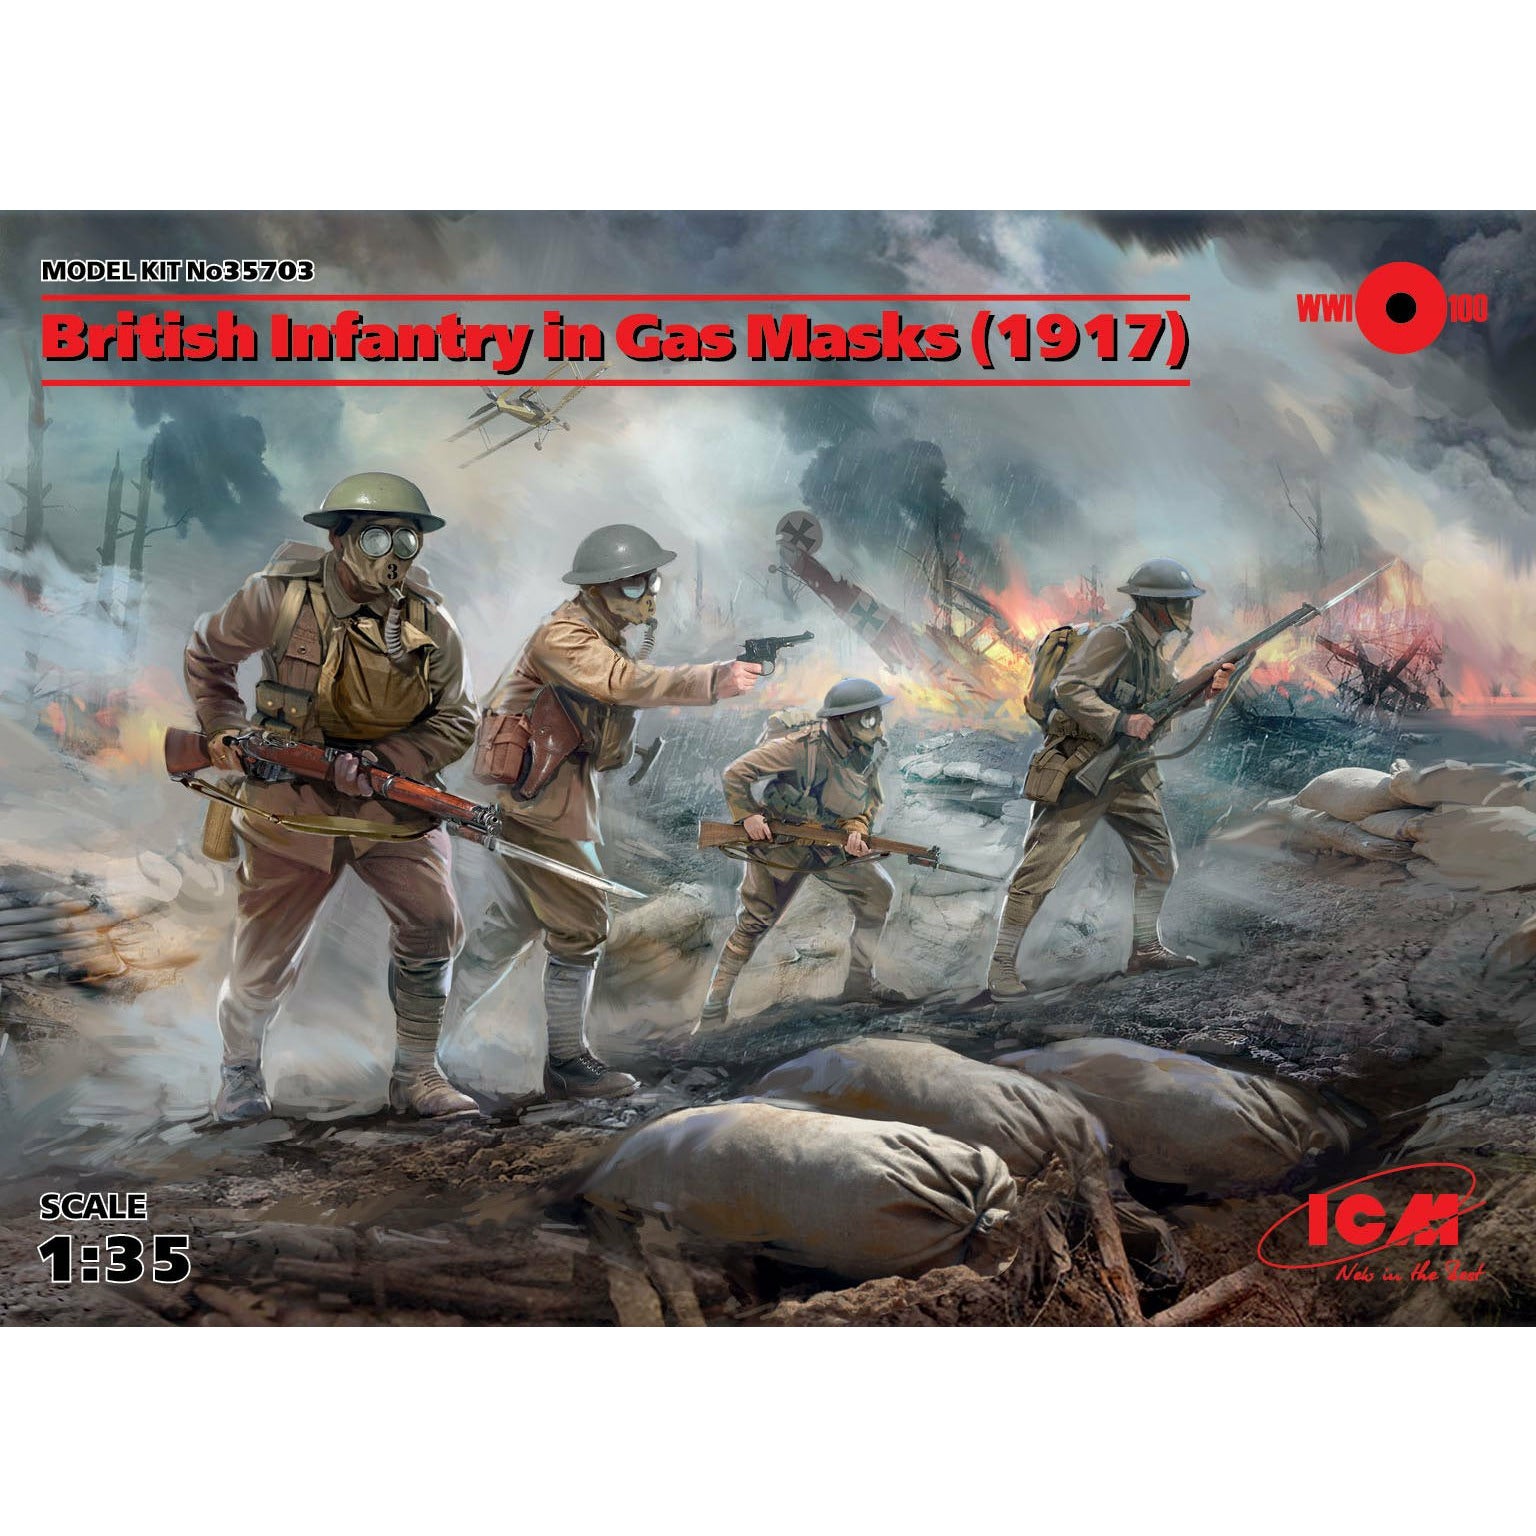 British Infantry in Gas Masks (1917) 1/35 #35703 by ICM